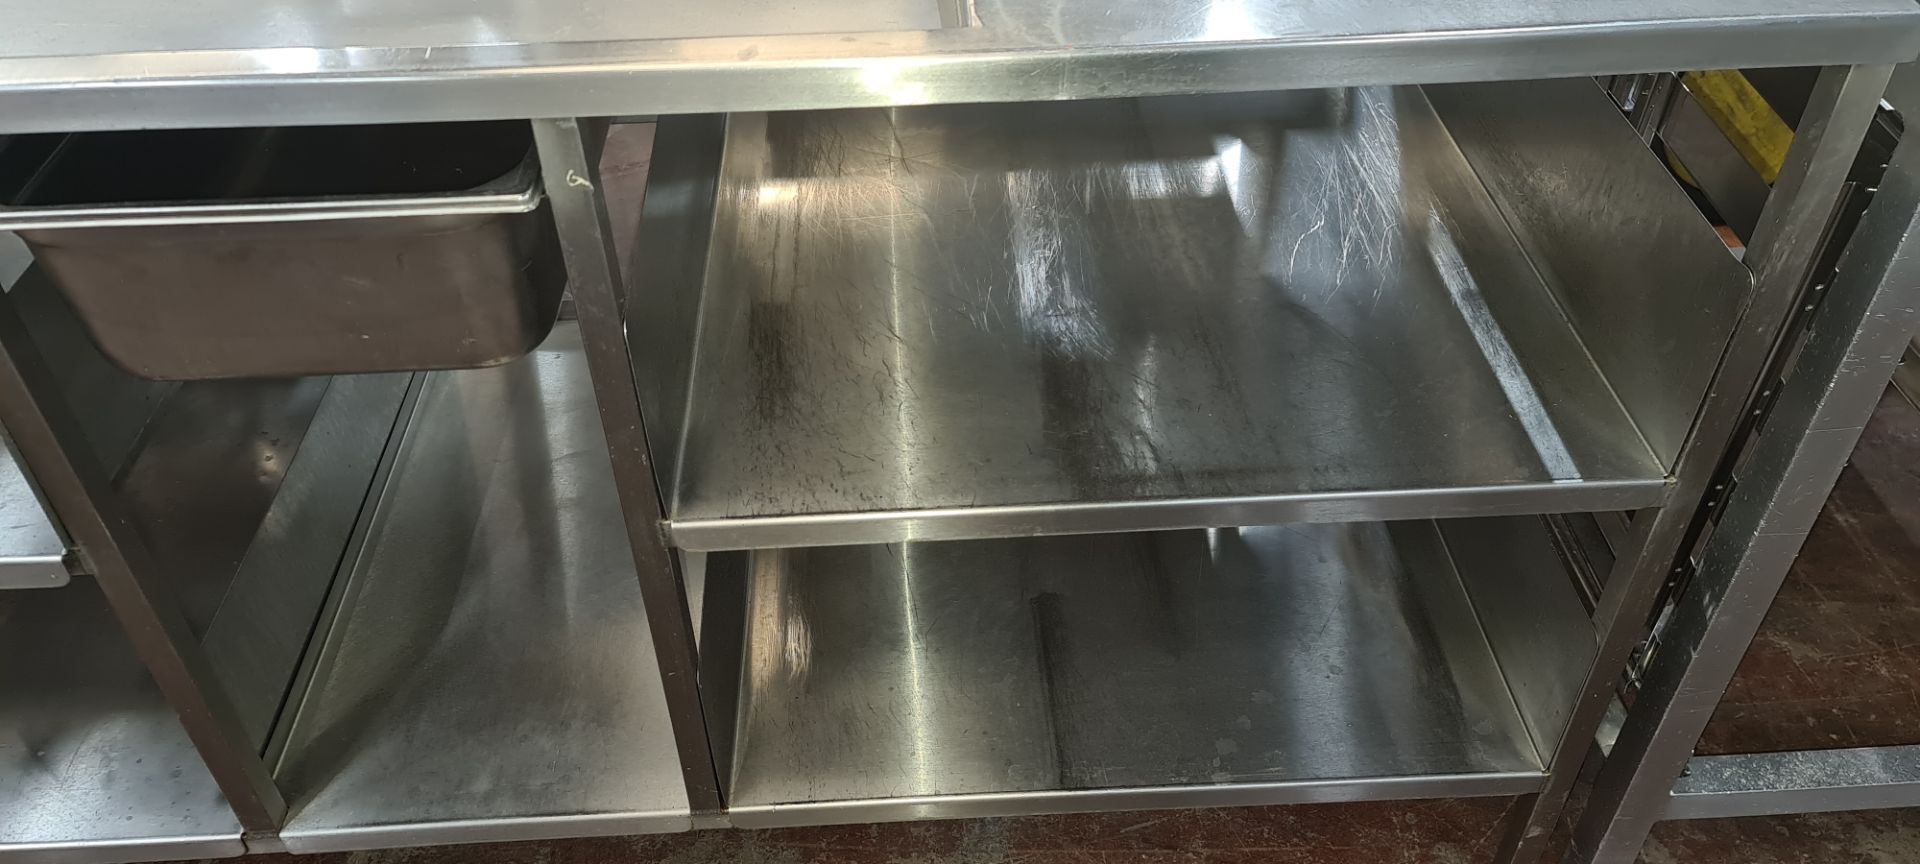 Large stainless steel multi-tier table with draining section - Image 6 of 7